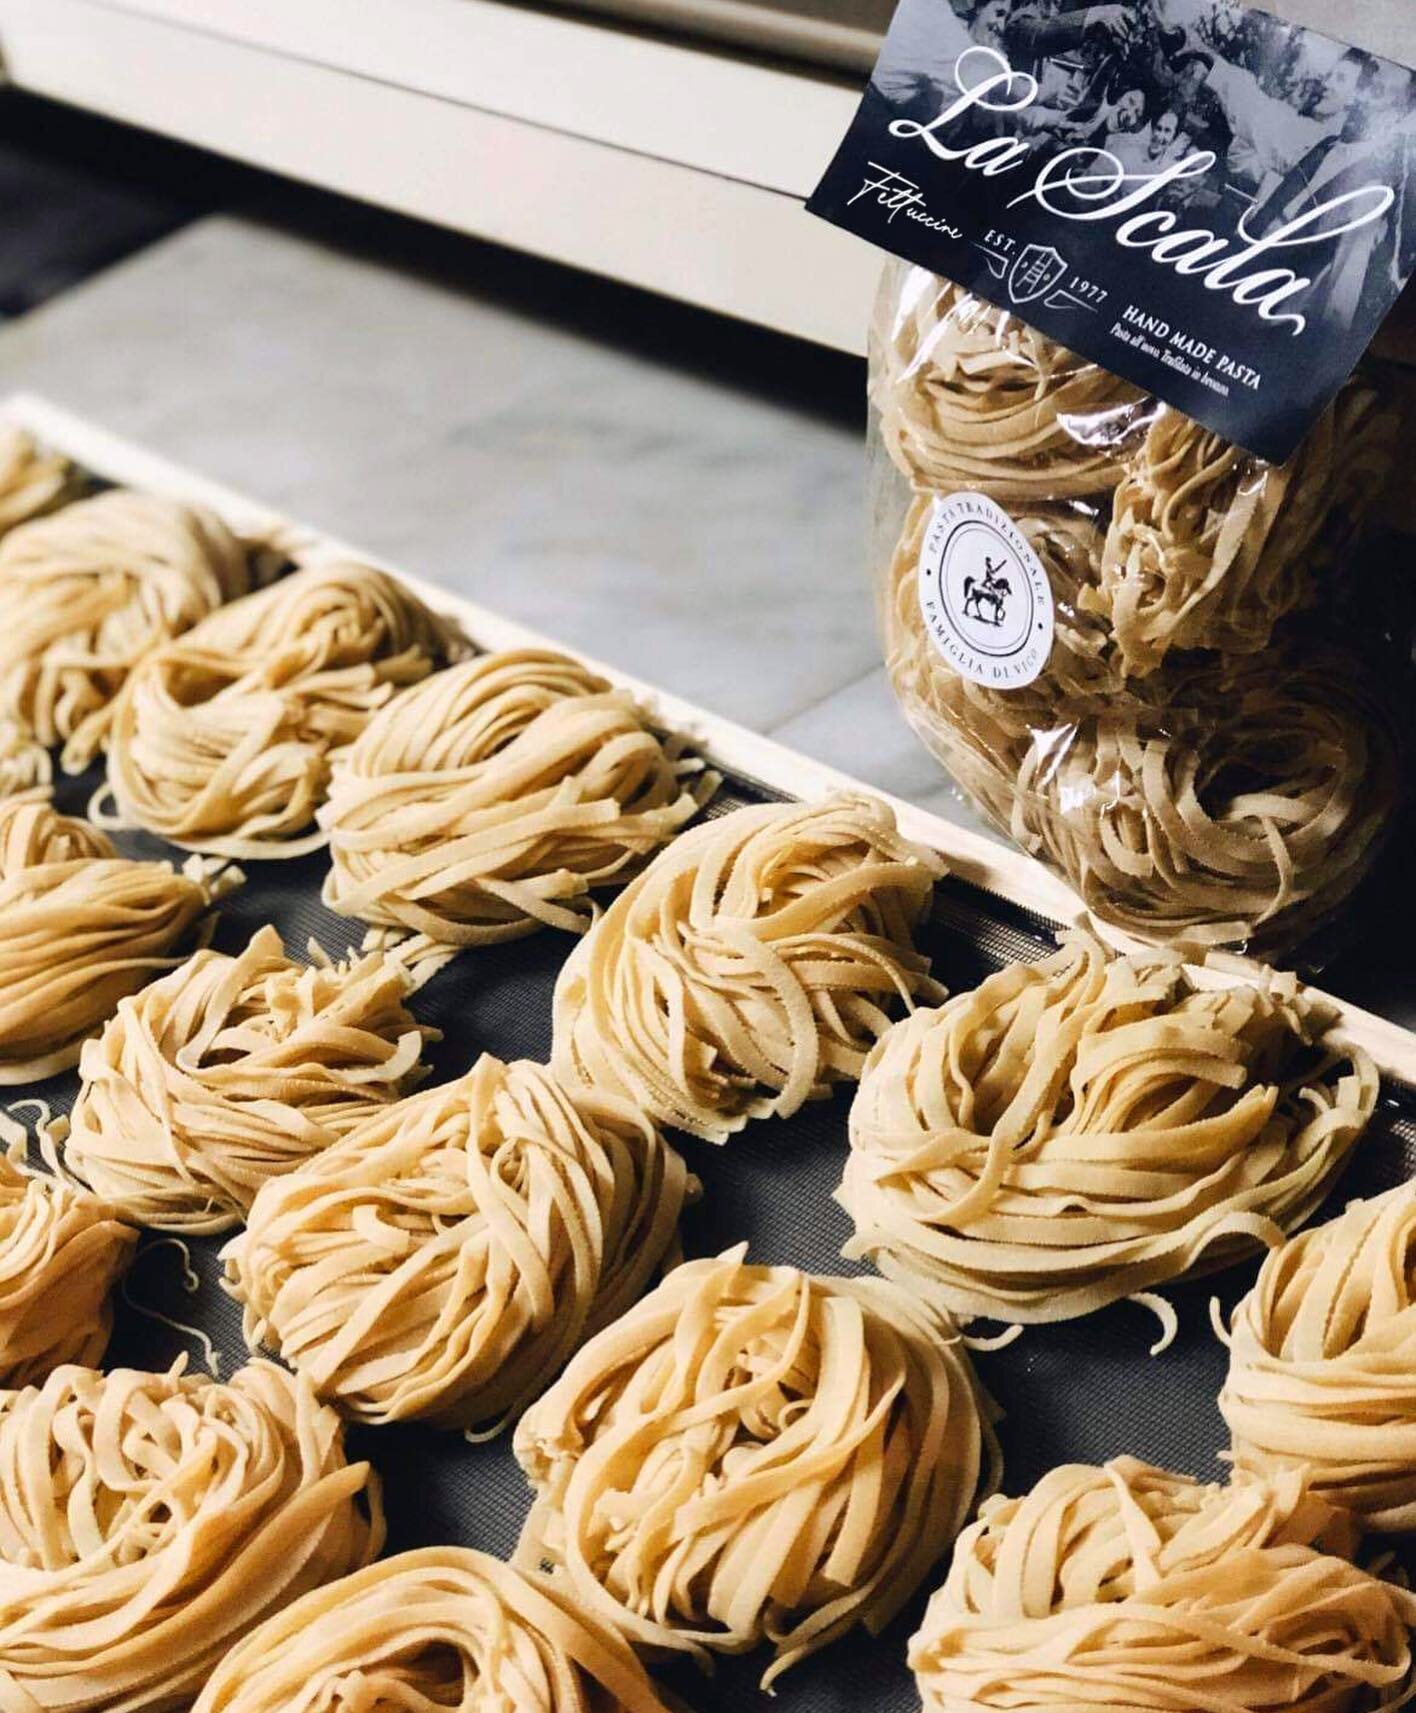 Introducing our very own range of handmade dried pasta 🍝 take a little bit of La Scala home with you this Easter. 
Available for purchase at @broomesfruitveg &amp; @lapiccolagrosseria 
OPEN TONIGHT - 5pm pick up and delivery